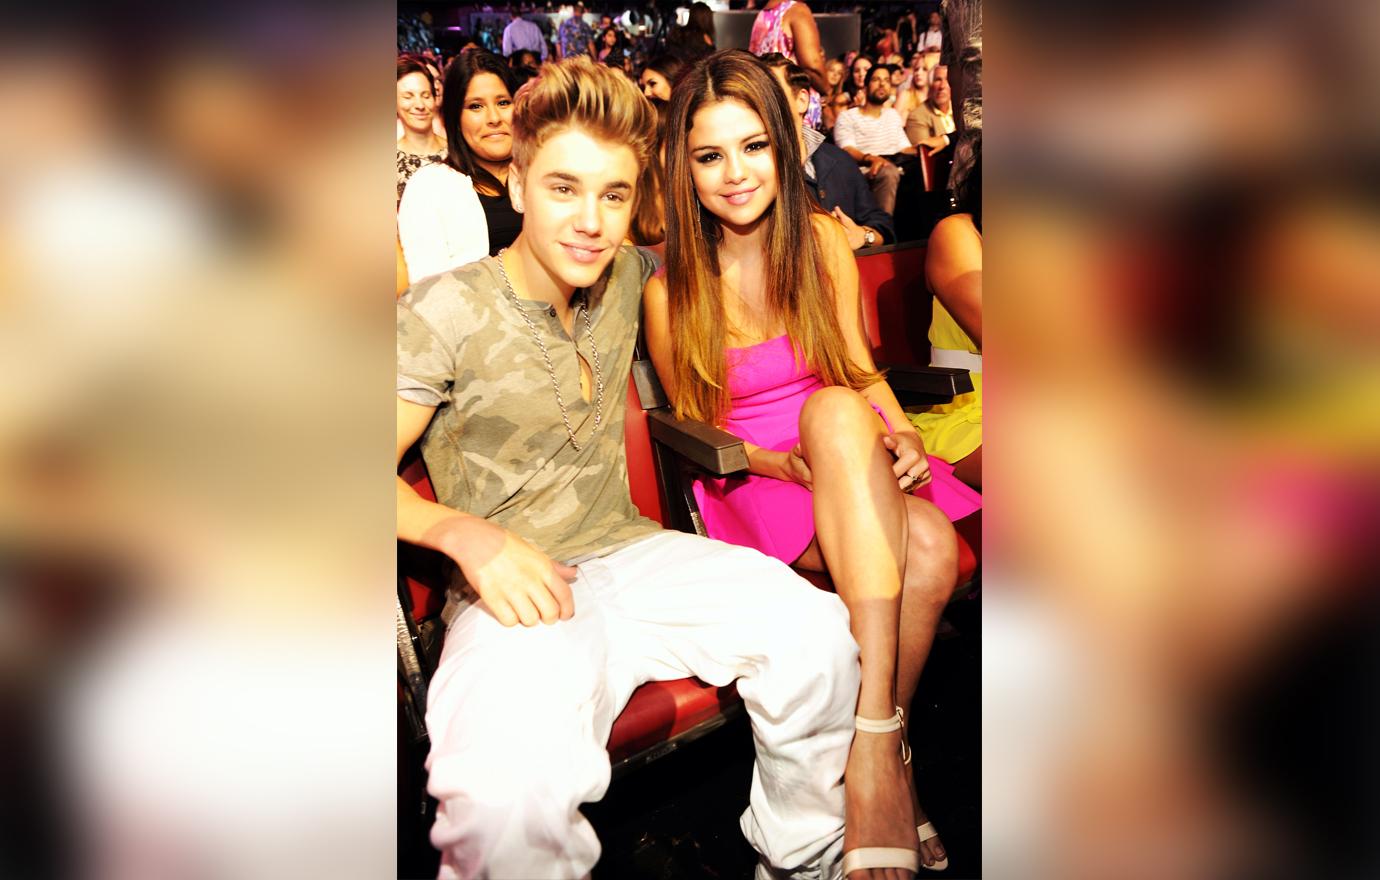 Justin Bieber Sits With His Arm Around Selena Gomez Sitting At Award Show